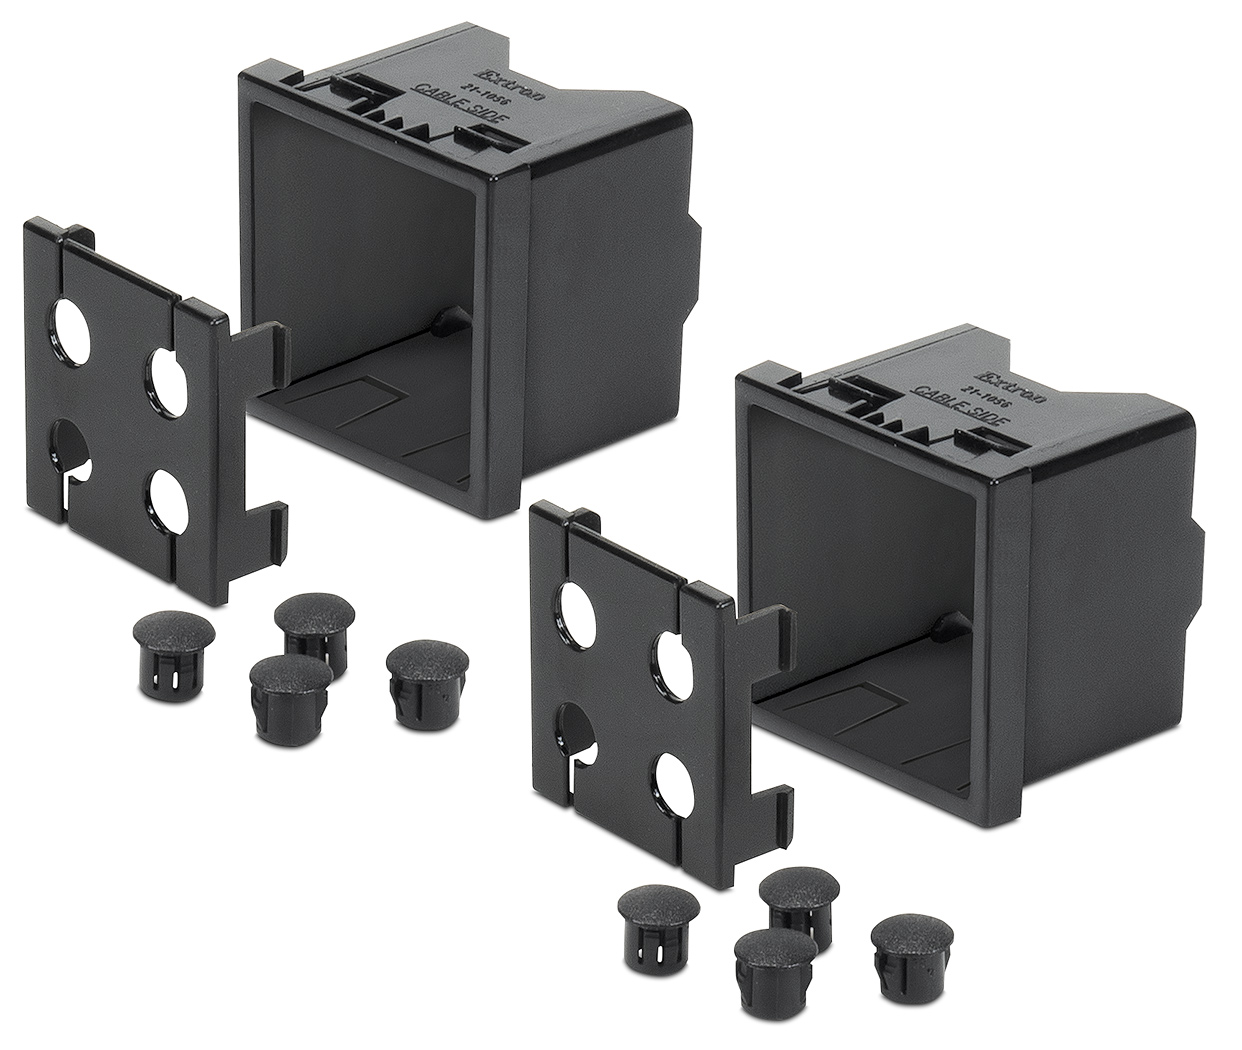 Captive Cable Kit included with Cable Cubby F55 Edge; Black PN 70-1296-02